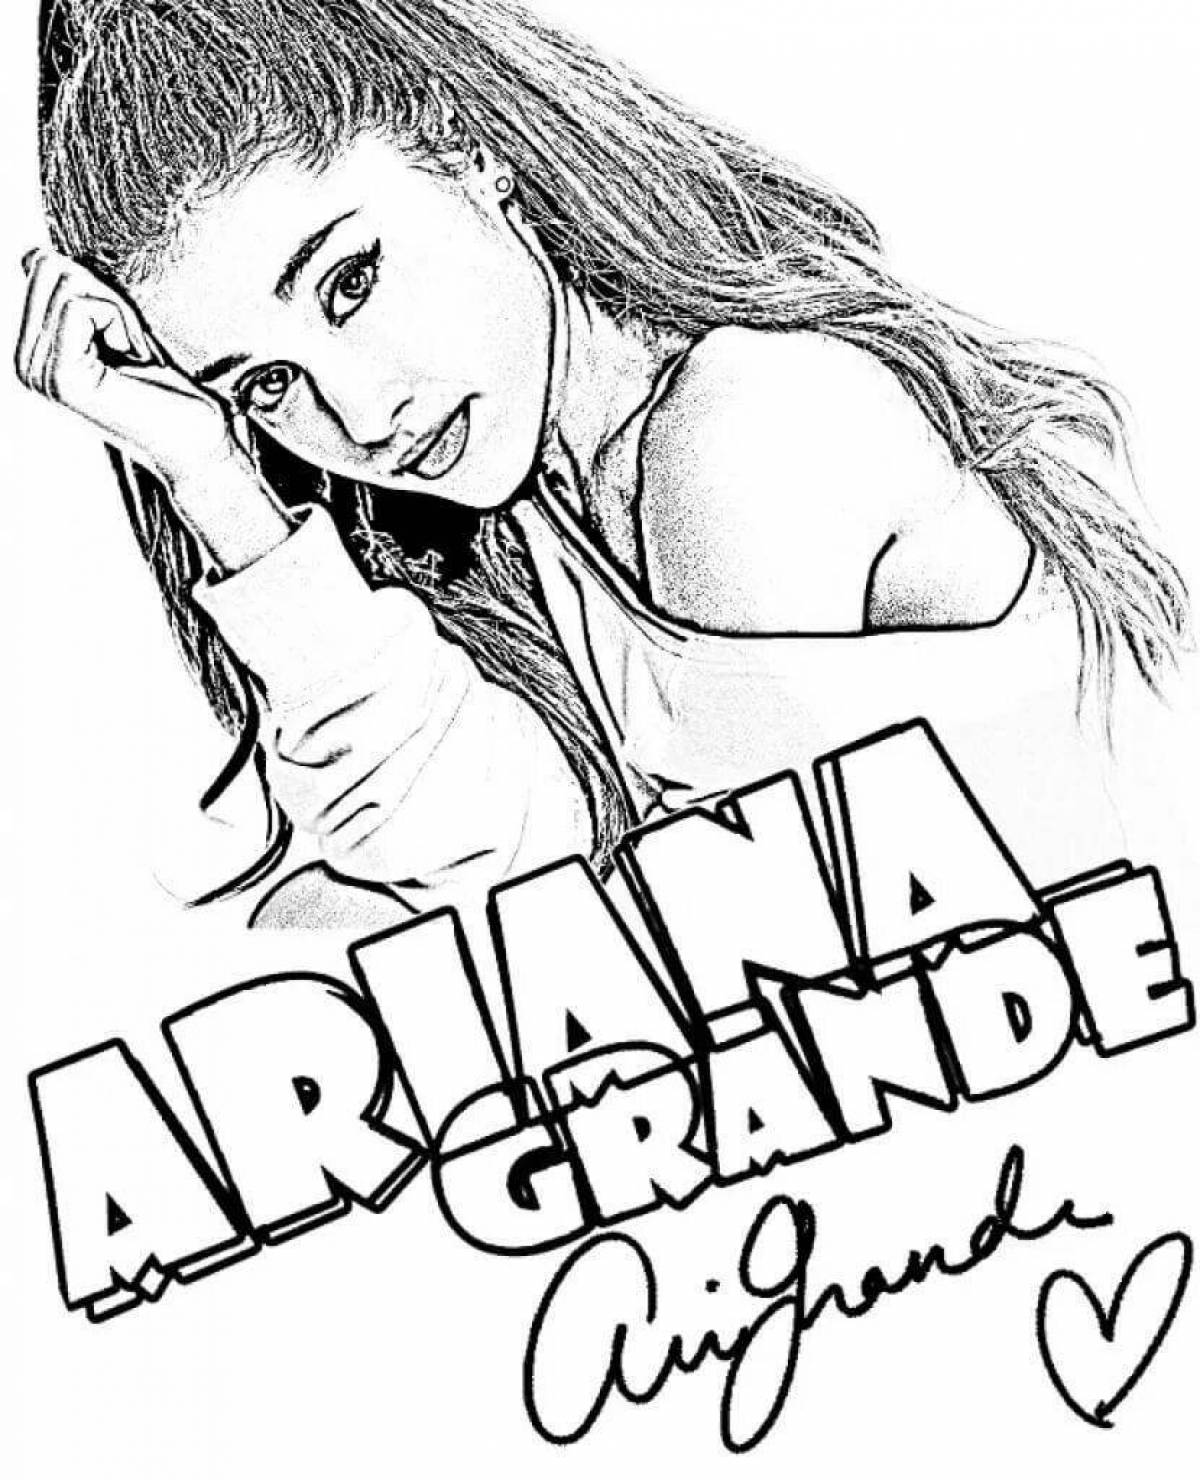 Ariana grande style coloring page